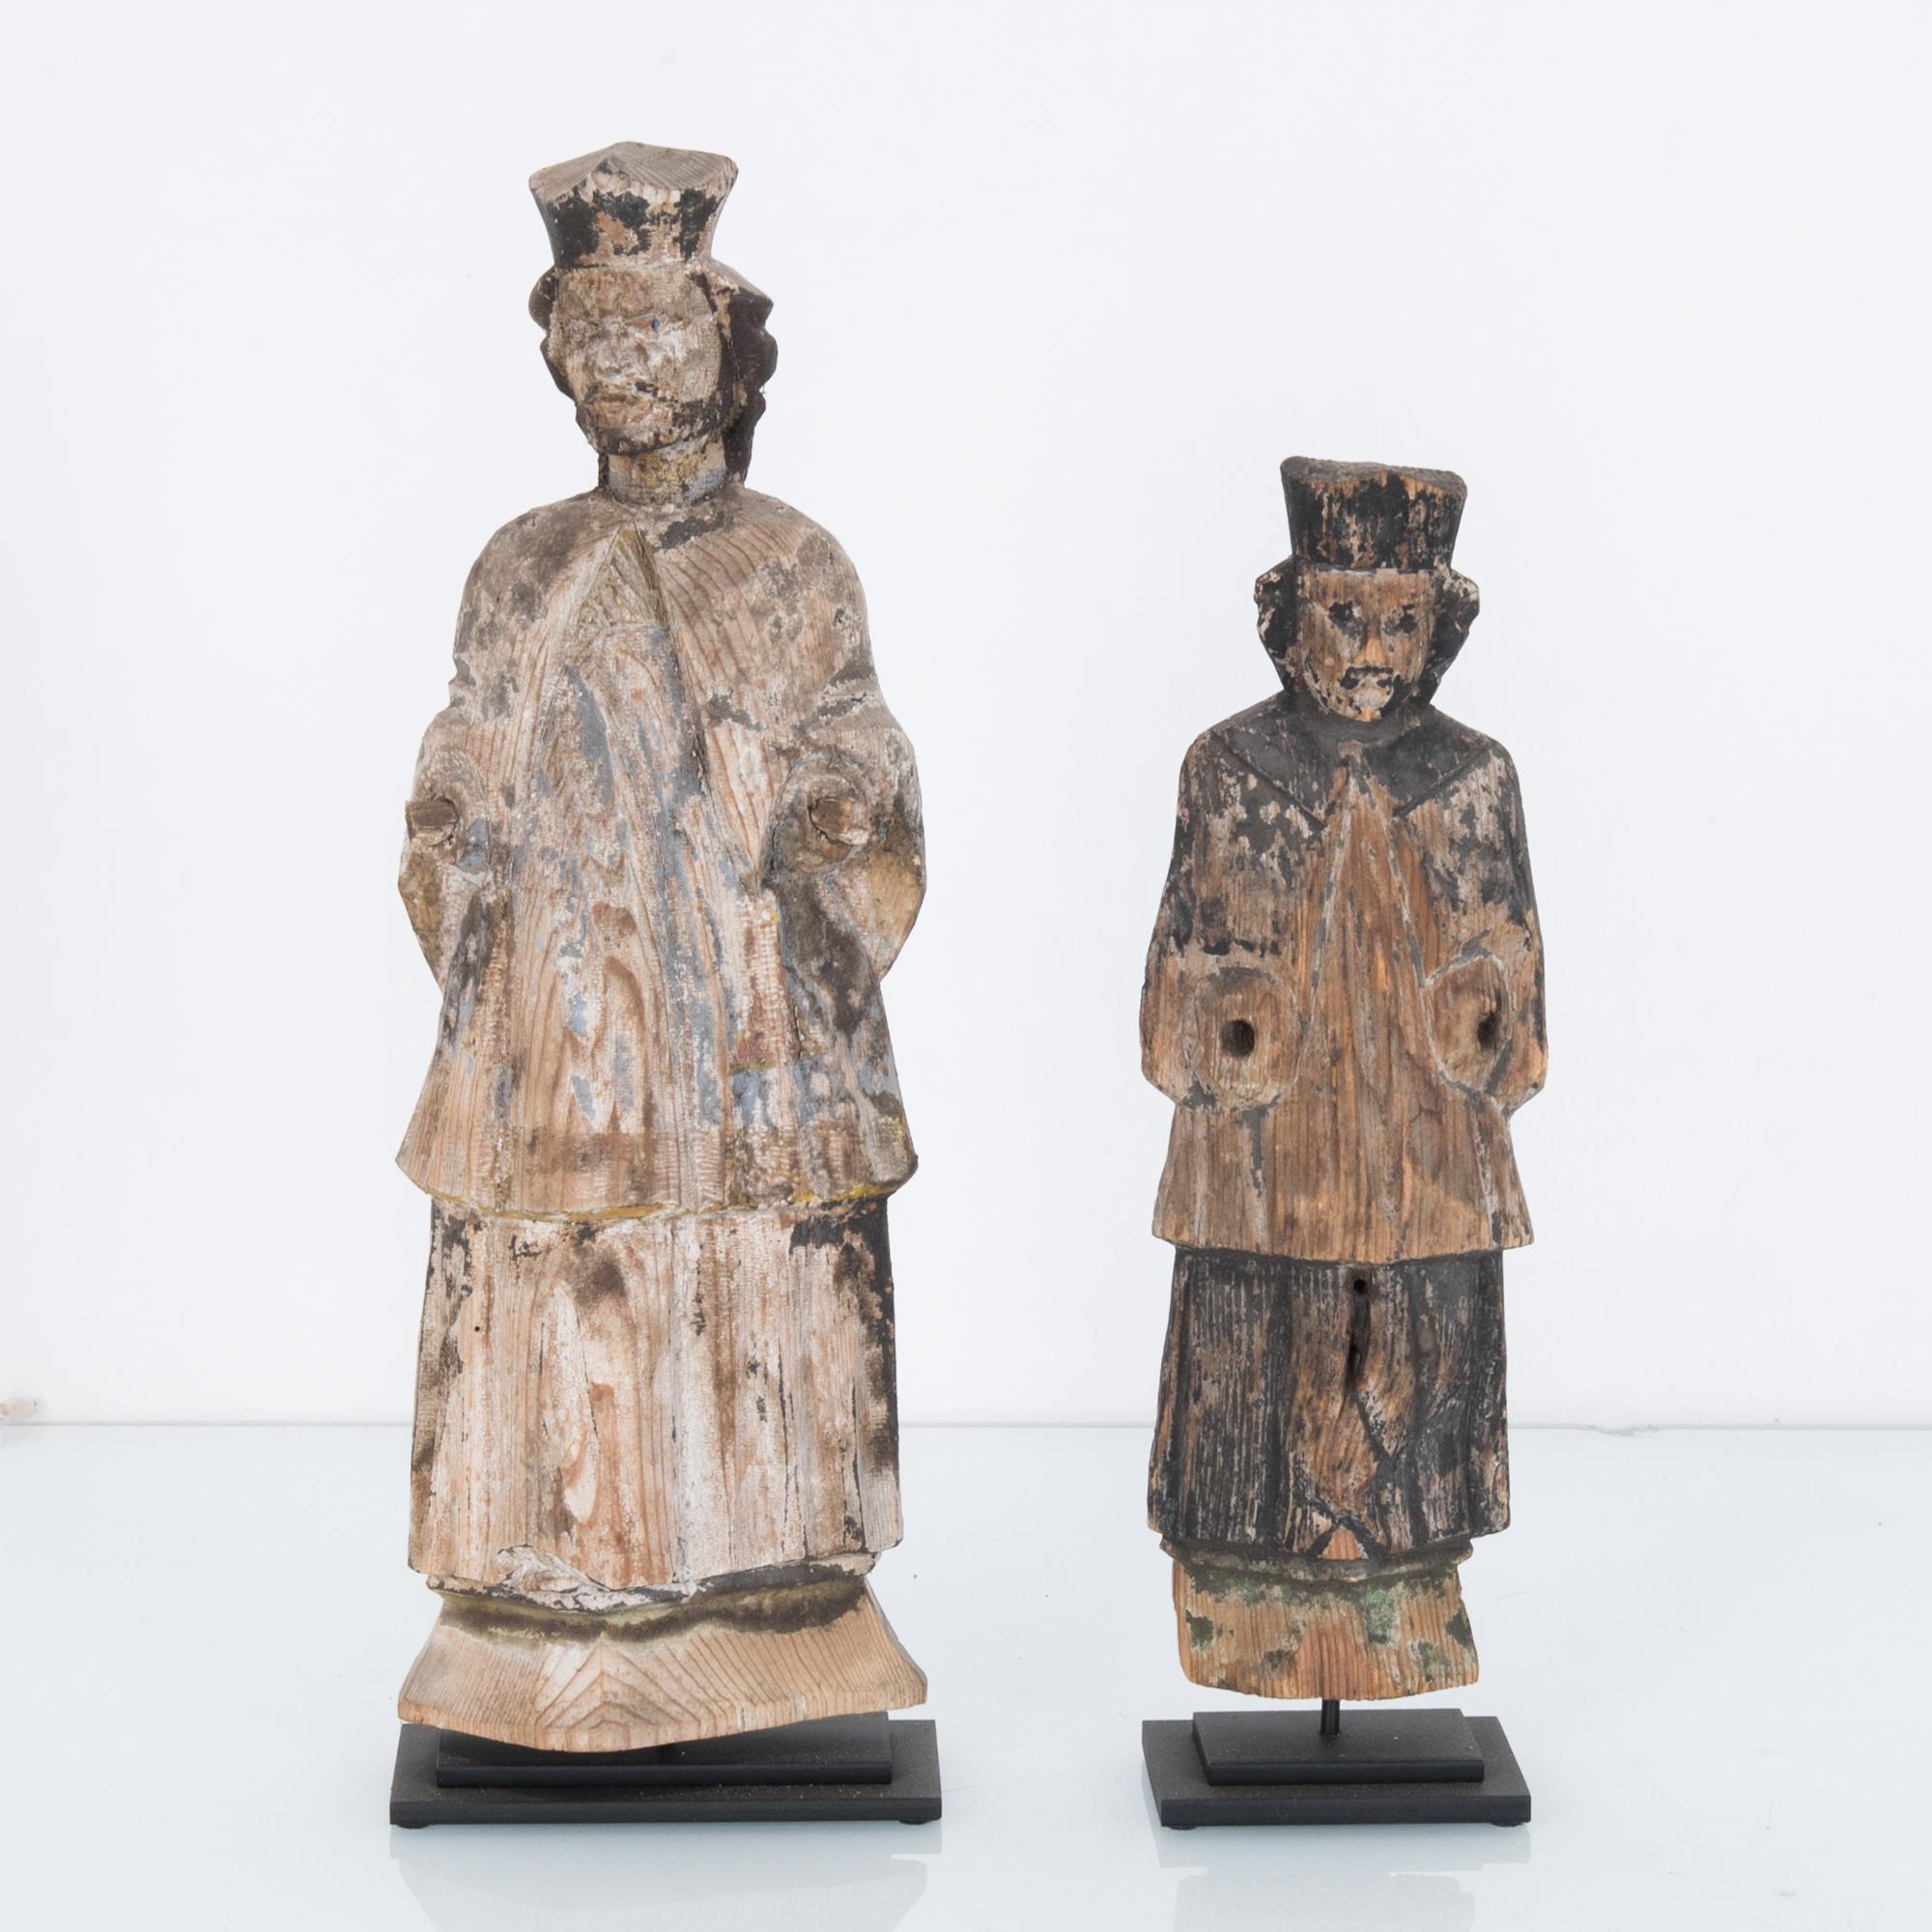 A pair of carved wooden figures from Central Europe, circa 1780. Once painted, the stripped back finish of the natural wood reveals a fluid, expressive grain. Flowing robes and small hats suggest that these figures belong to nobility or priesthood.